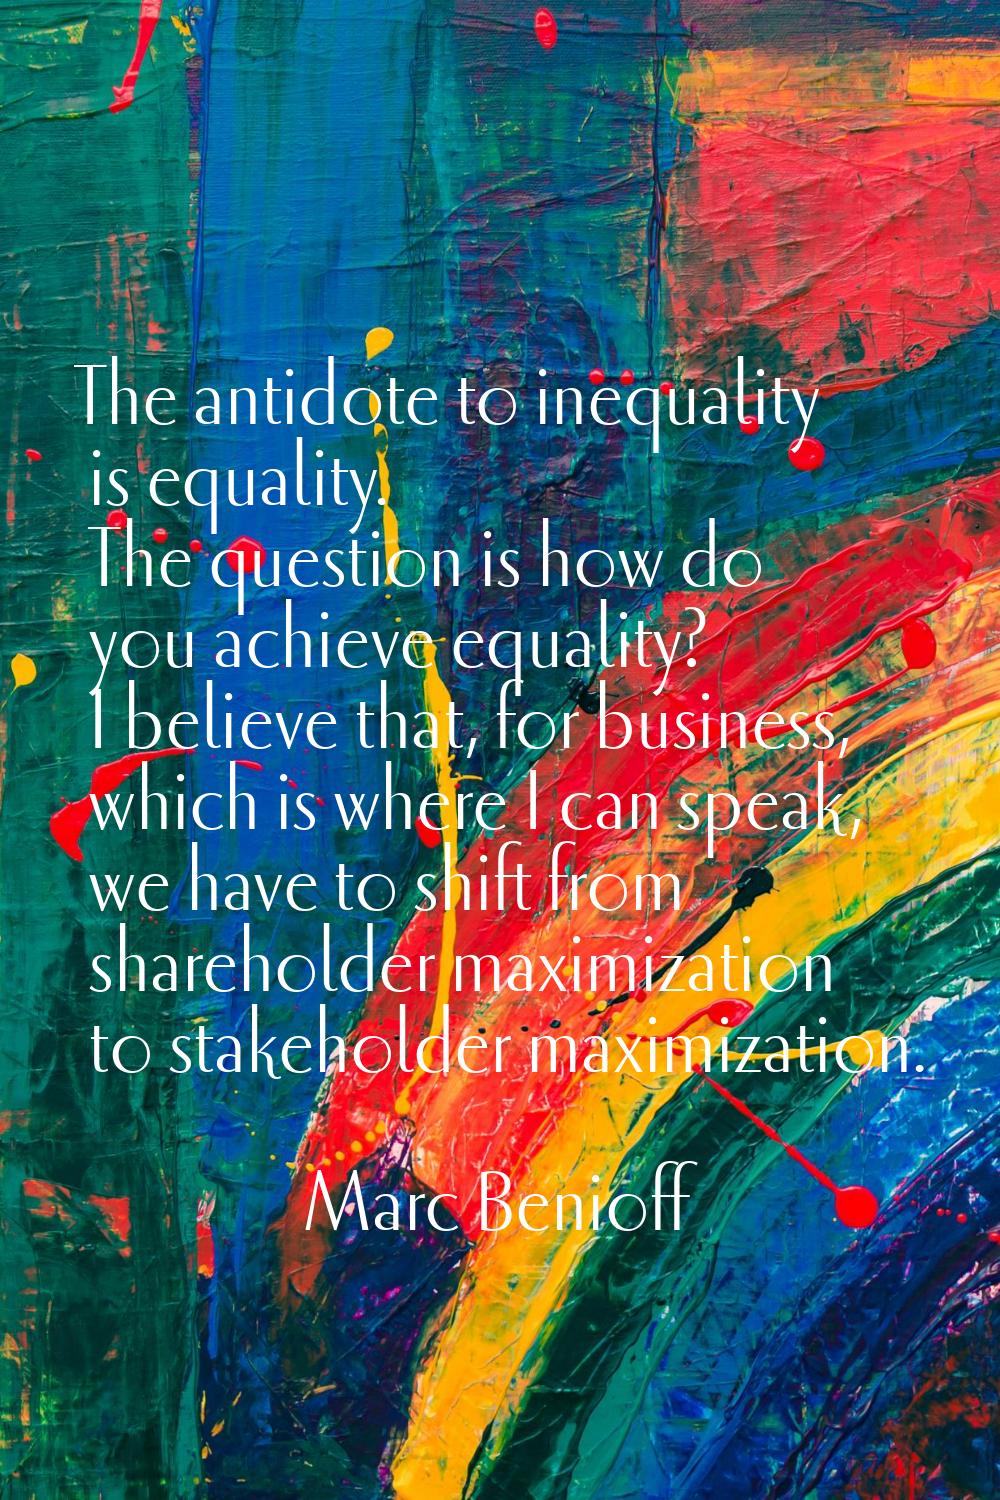 The antidote to inequality is equality. The question is how do you achieve equality? I believe that